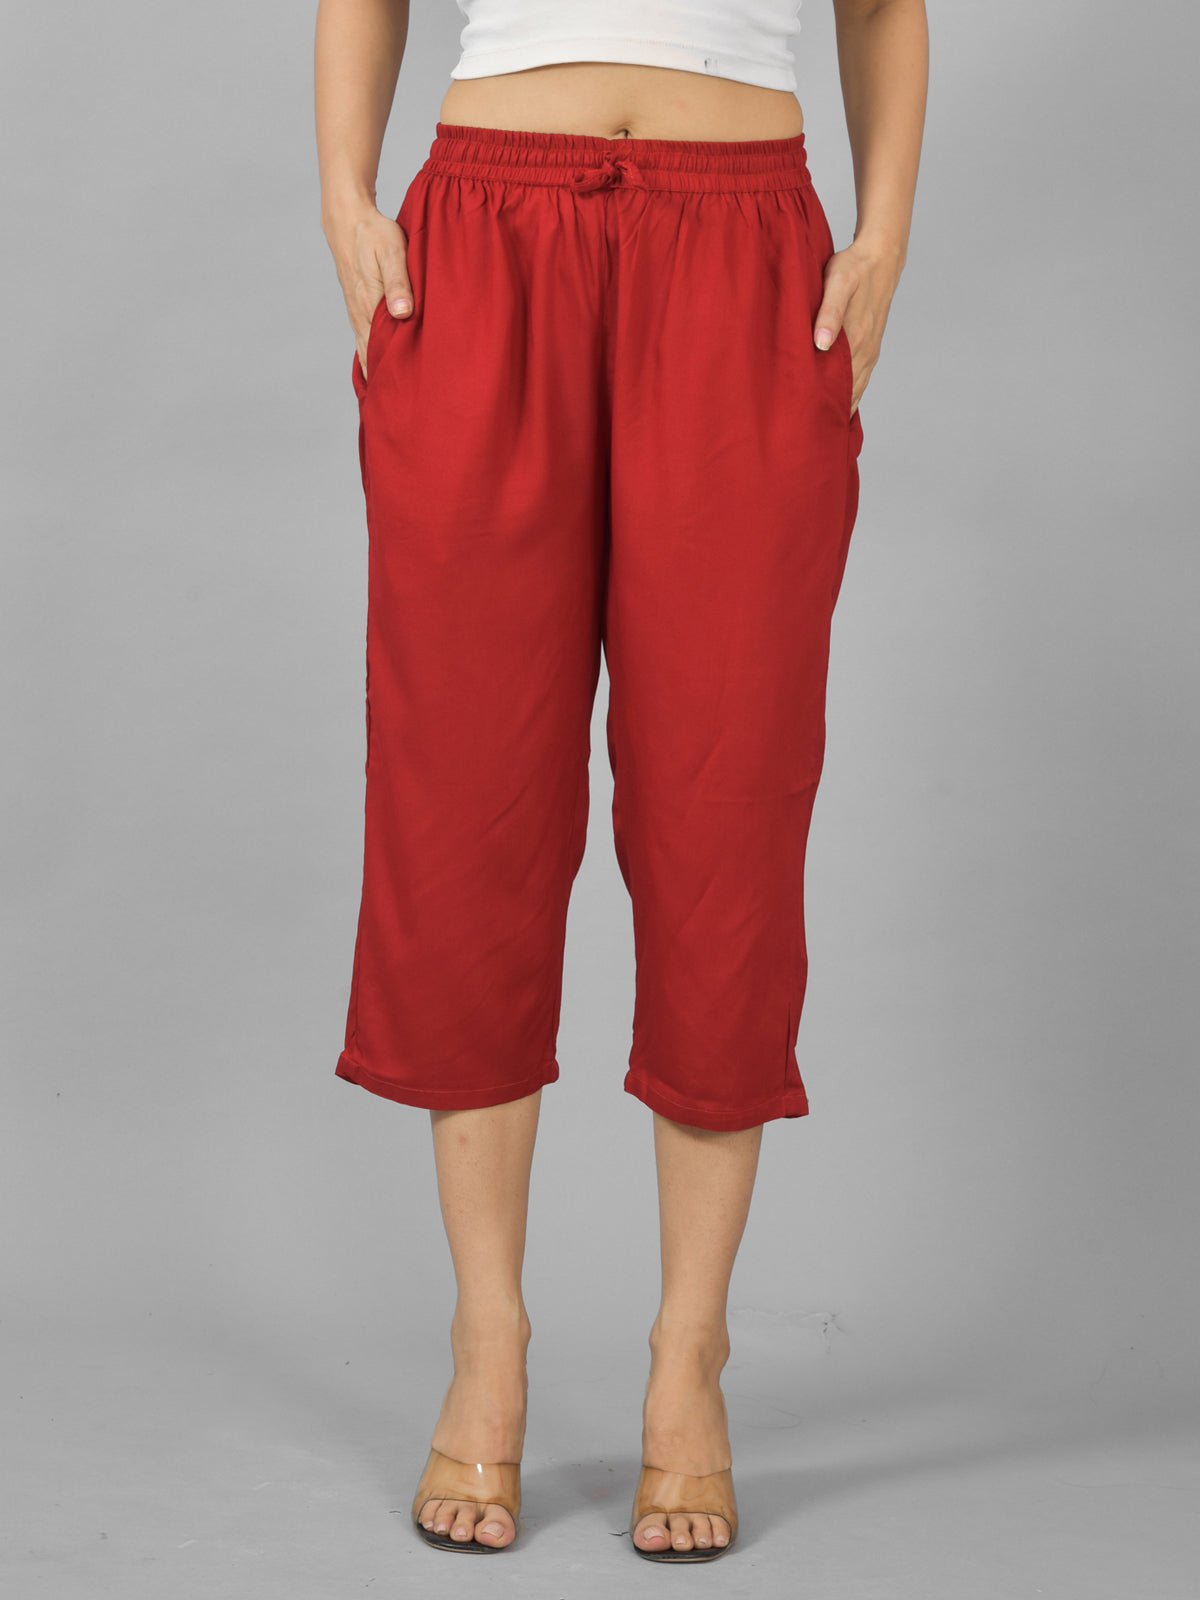 Pack Of 2 Womens Maroon And Mustard Calf Length Rayon Culottes Trouser Combo